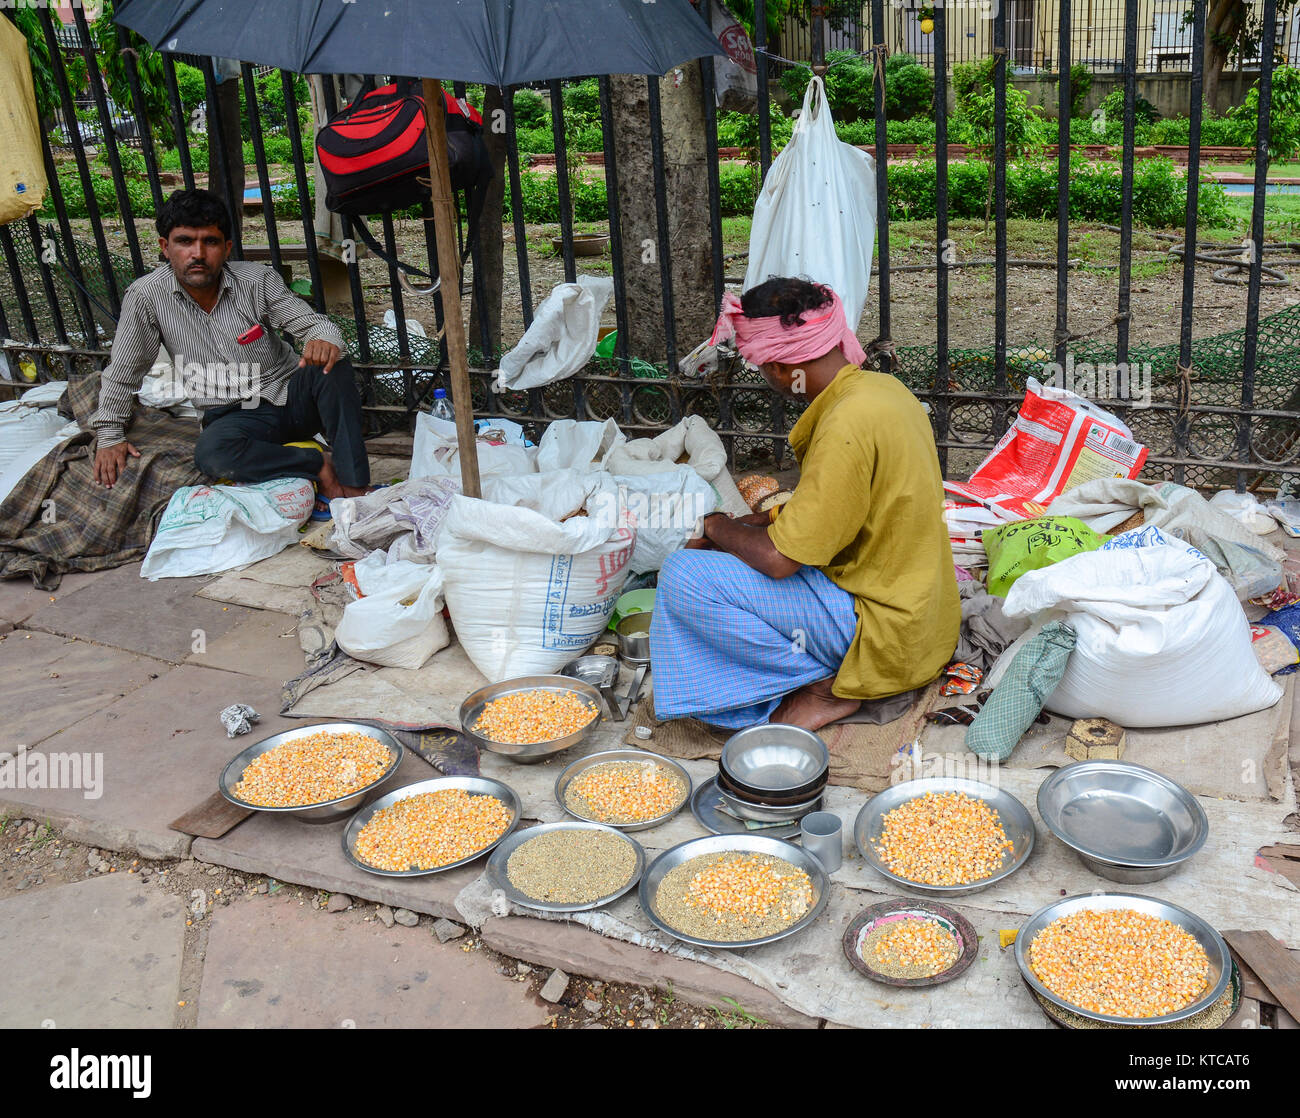 Delhi, India - Jul 26, 2015. People selling bird foods at the old market in Delhi, India. According to the 2011 census of India, the population of Del Stock Photo